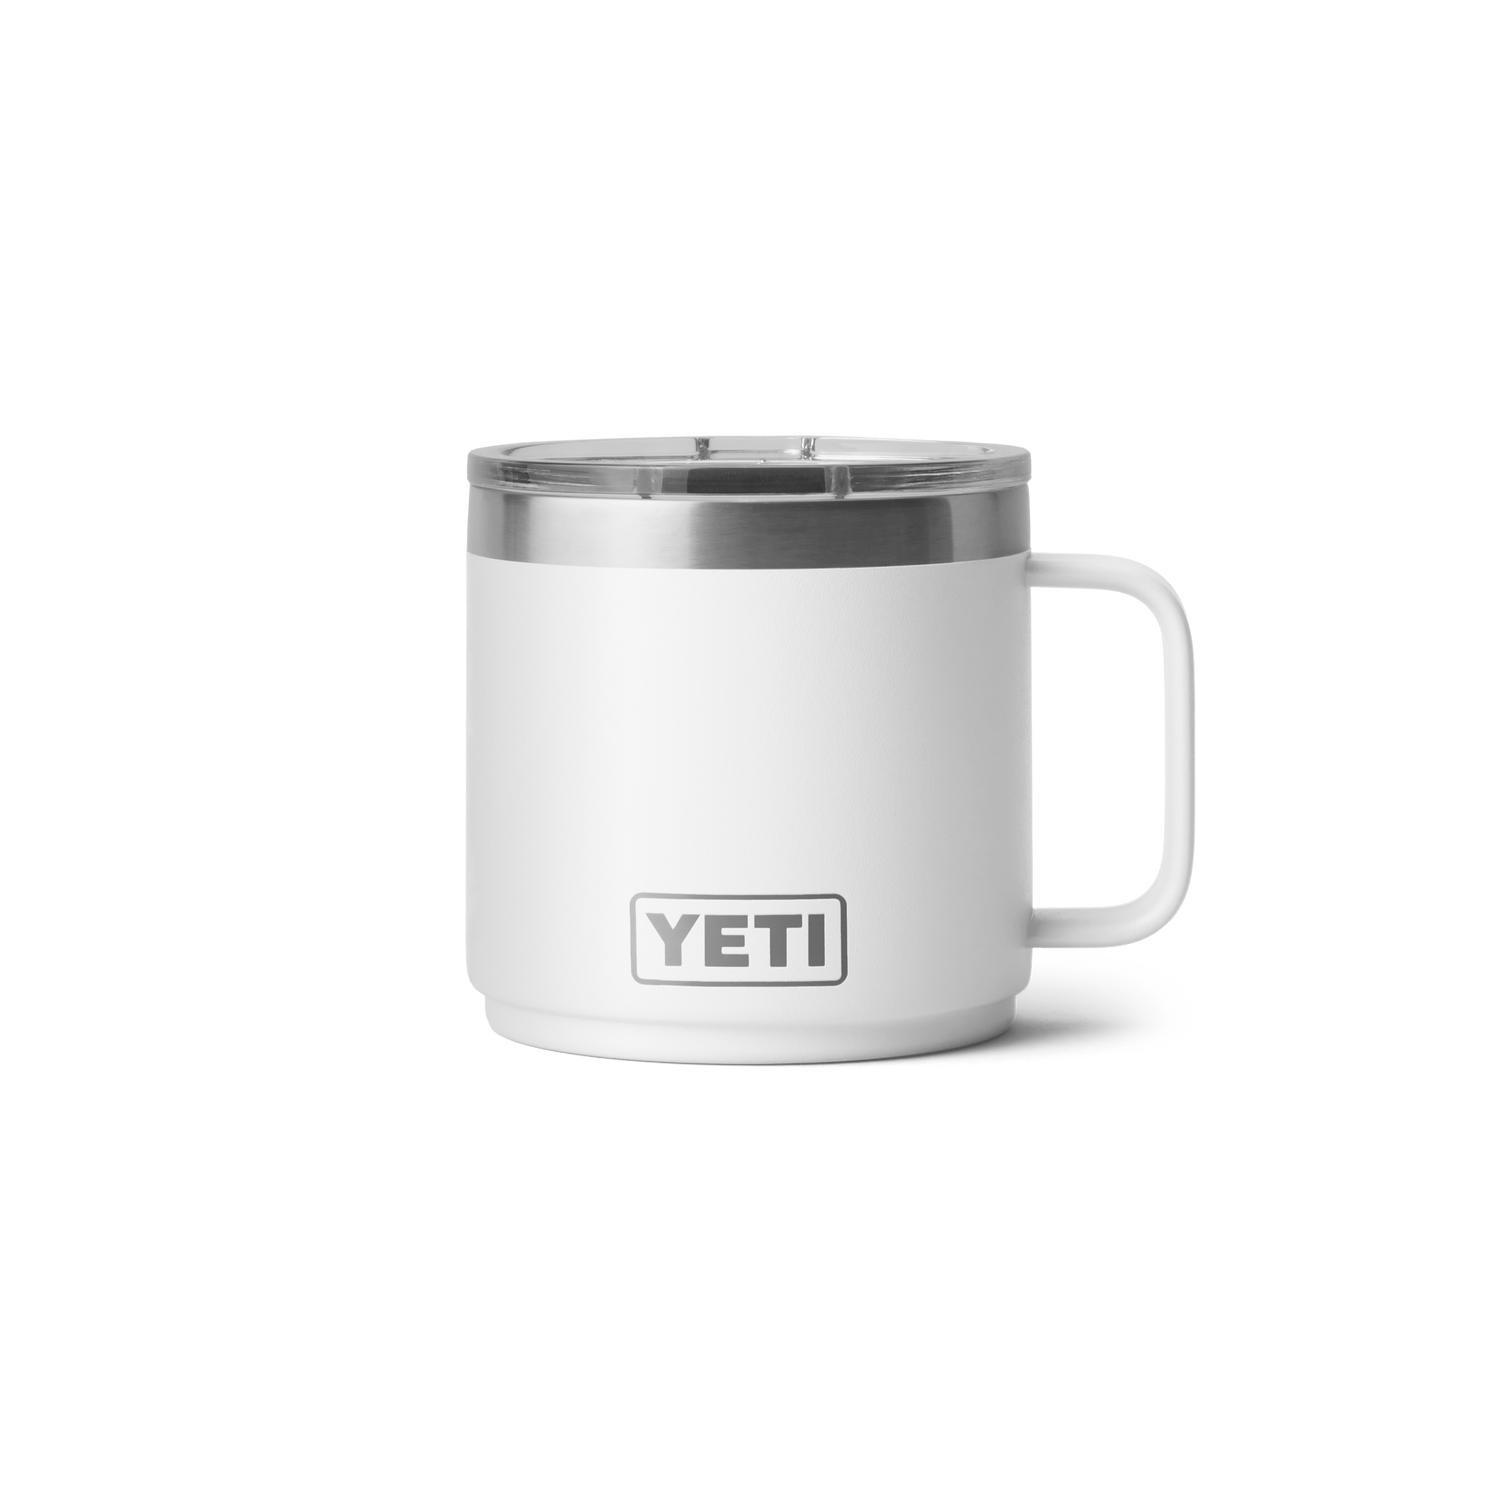  YETI Stainless Steel Rambler Travel Drinking_Cup, Vacuum  Insulated with Stronghold Lid, 30 Ounces, Nordic Purple : Home & Kitchen